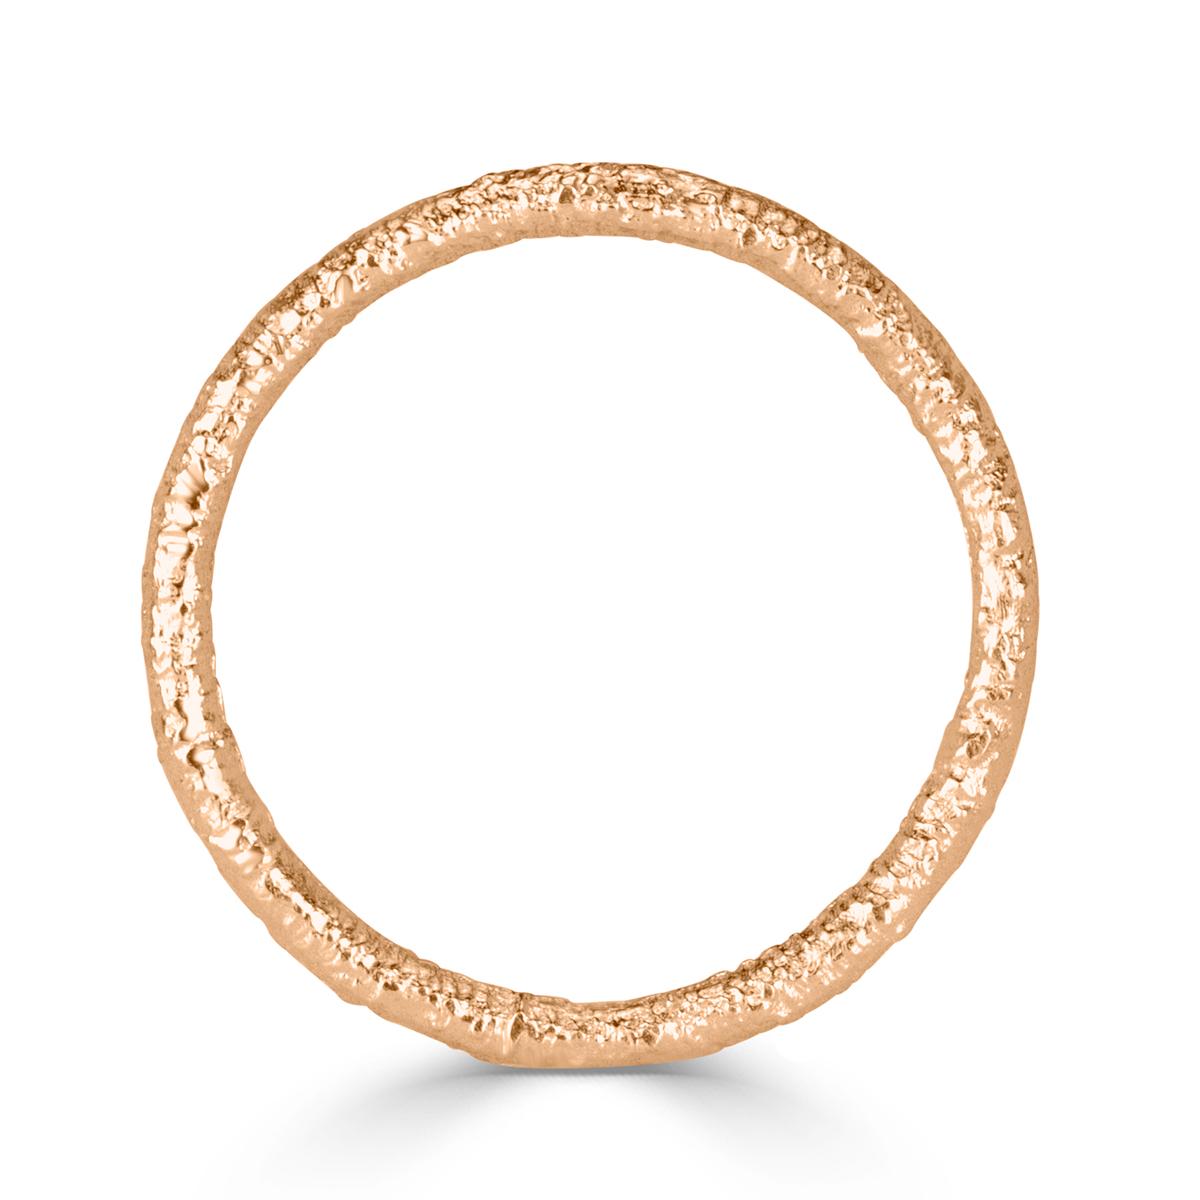 Mark Broumand Handmade Textured Band in 18 Karat Rose Gold In New Condition For Sale In Los Angeles, CA